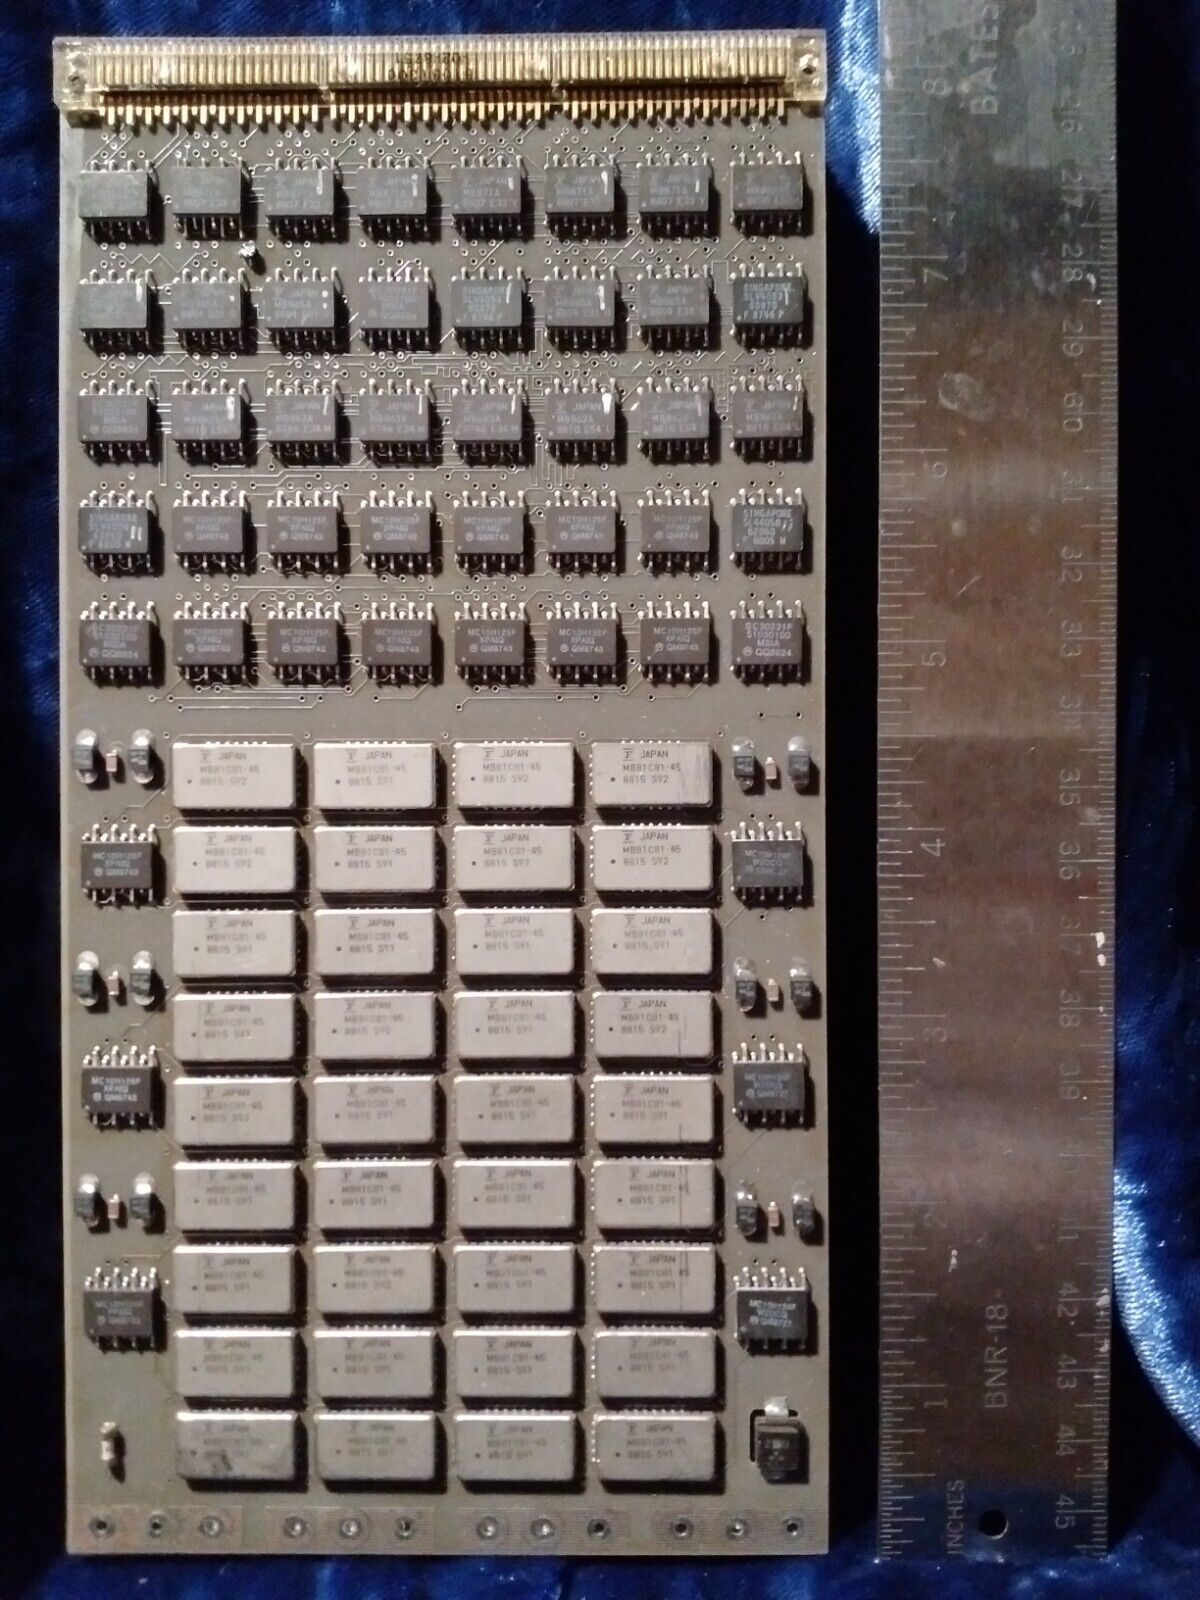 Cray-2 SuperComputer Board Memory.SilverSmall IC's DateCode is recent the Large